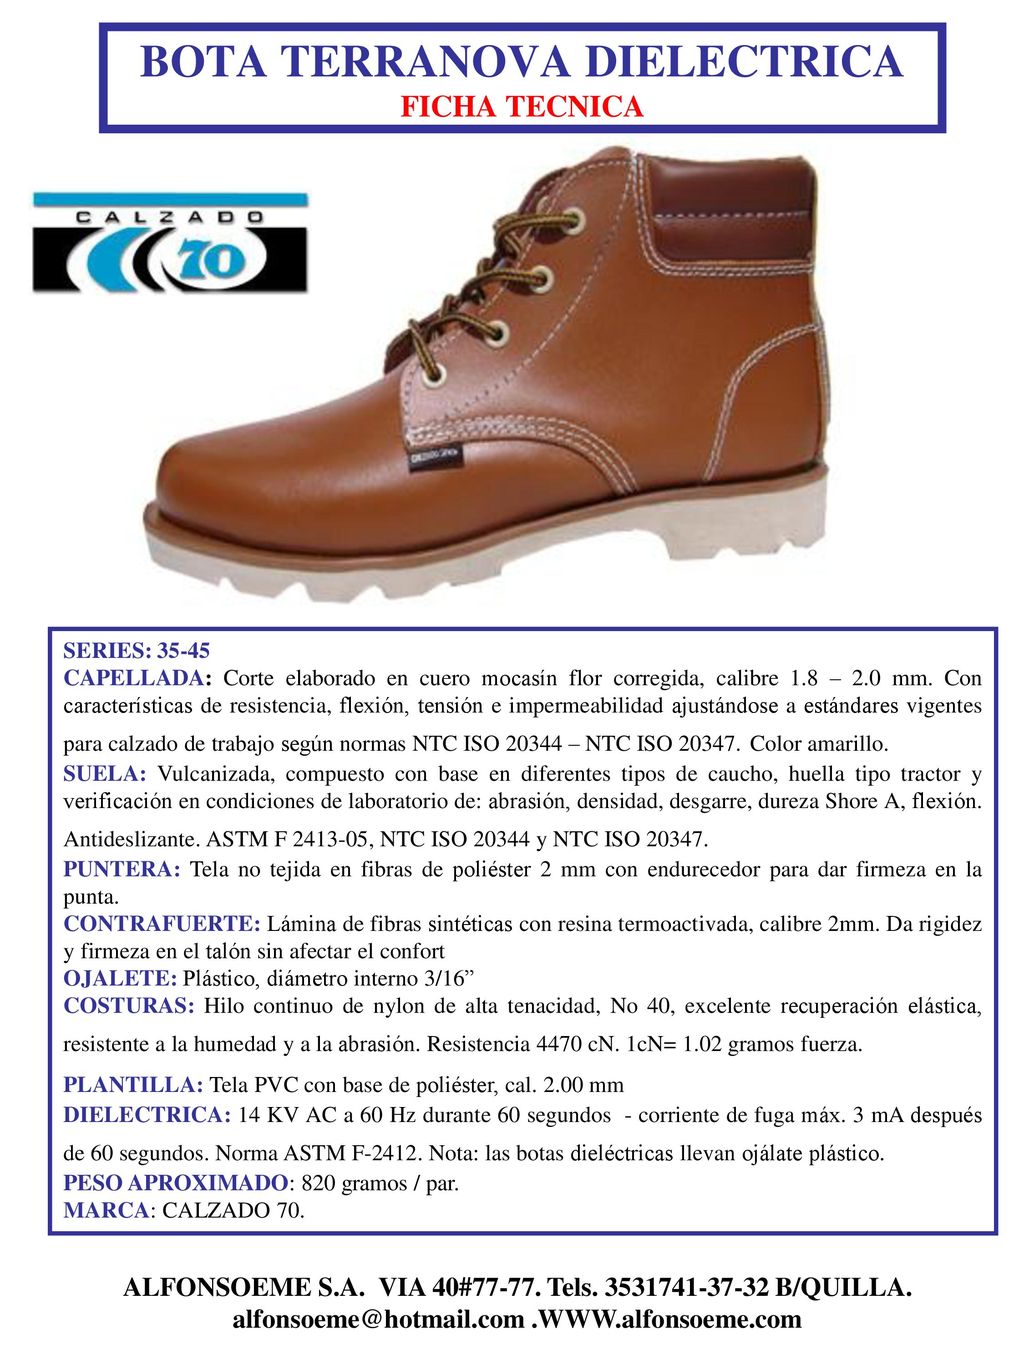 Zapatos De Dielectricos Online Offers, 61% OFF |